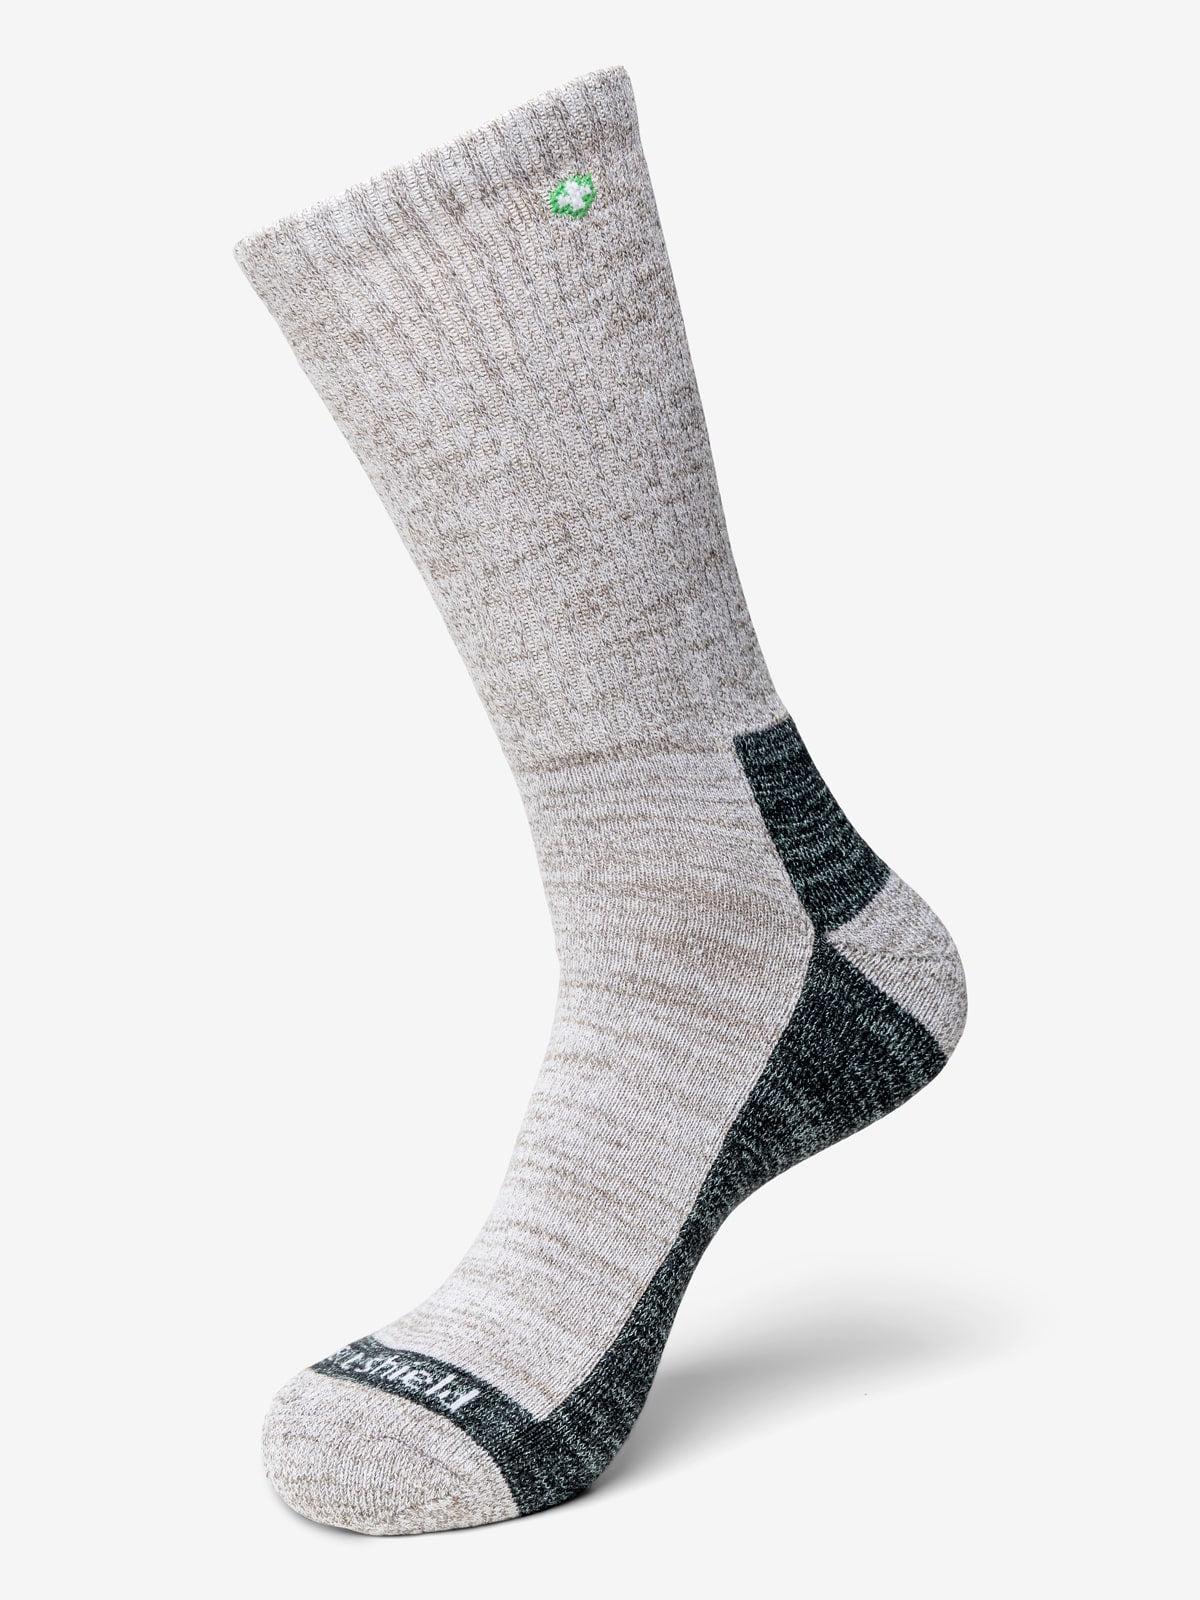 Insect Shield Midweight Hiker Socks